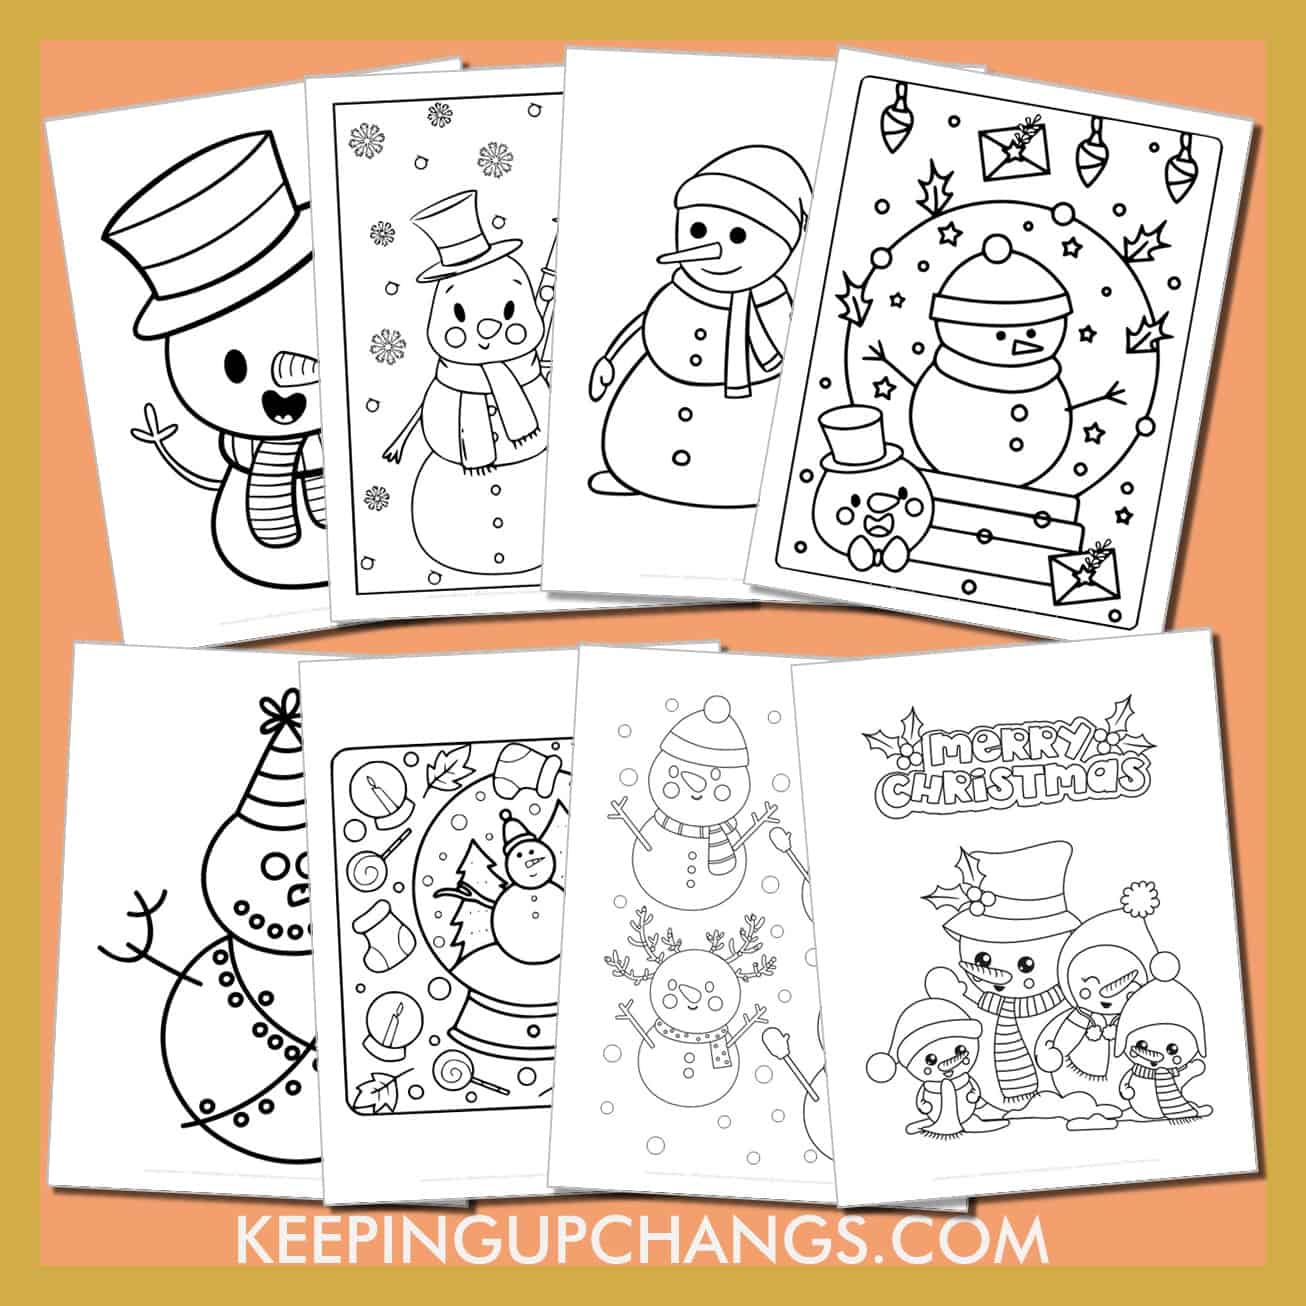 free snowman colouring sheets including cute, easy, simple and detailed winter christmas designs.